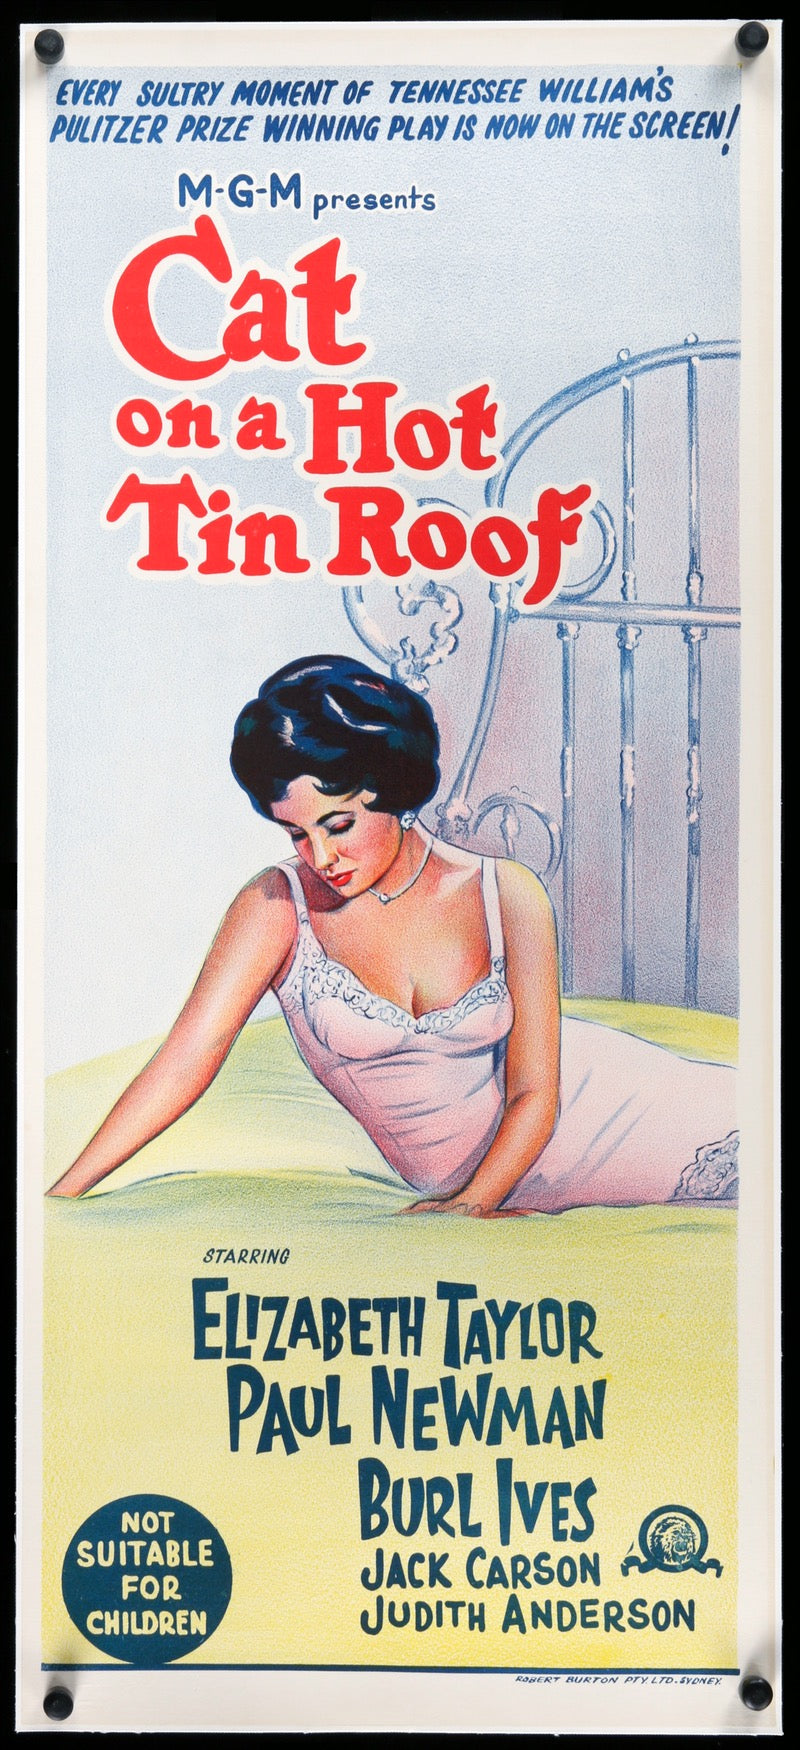 Cat on a Hot Tin Roof (1958) original movie poster for sale at Original Film Art